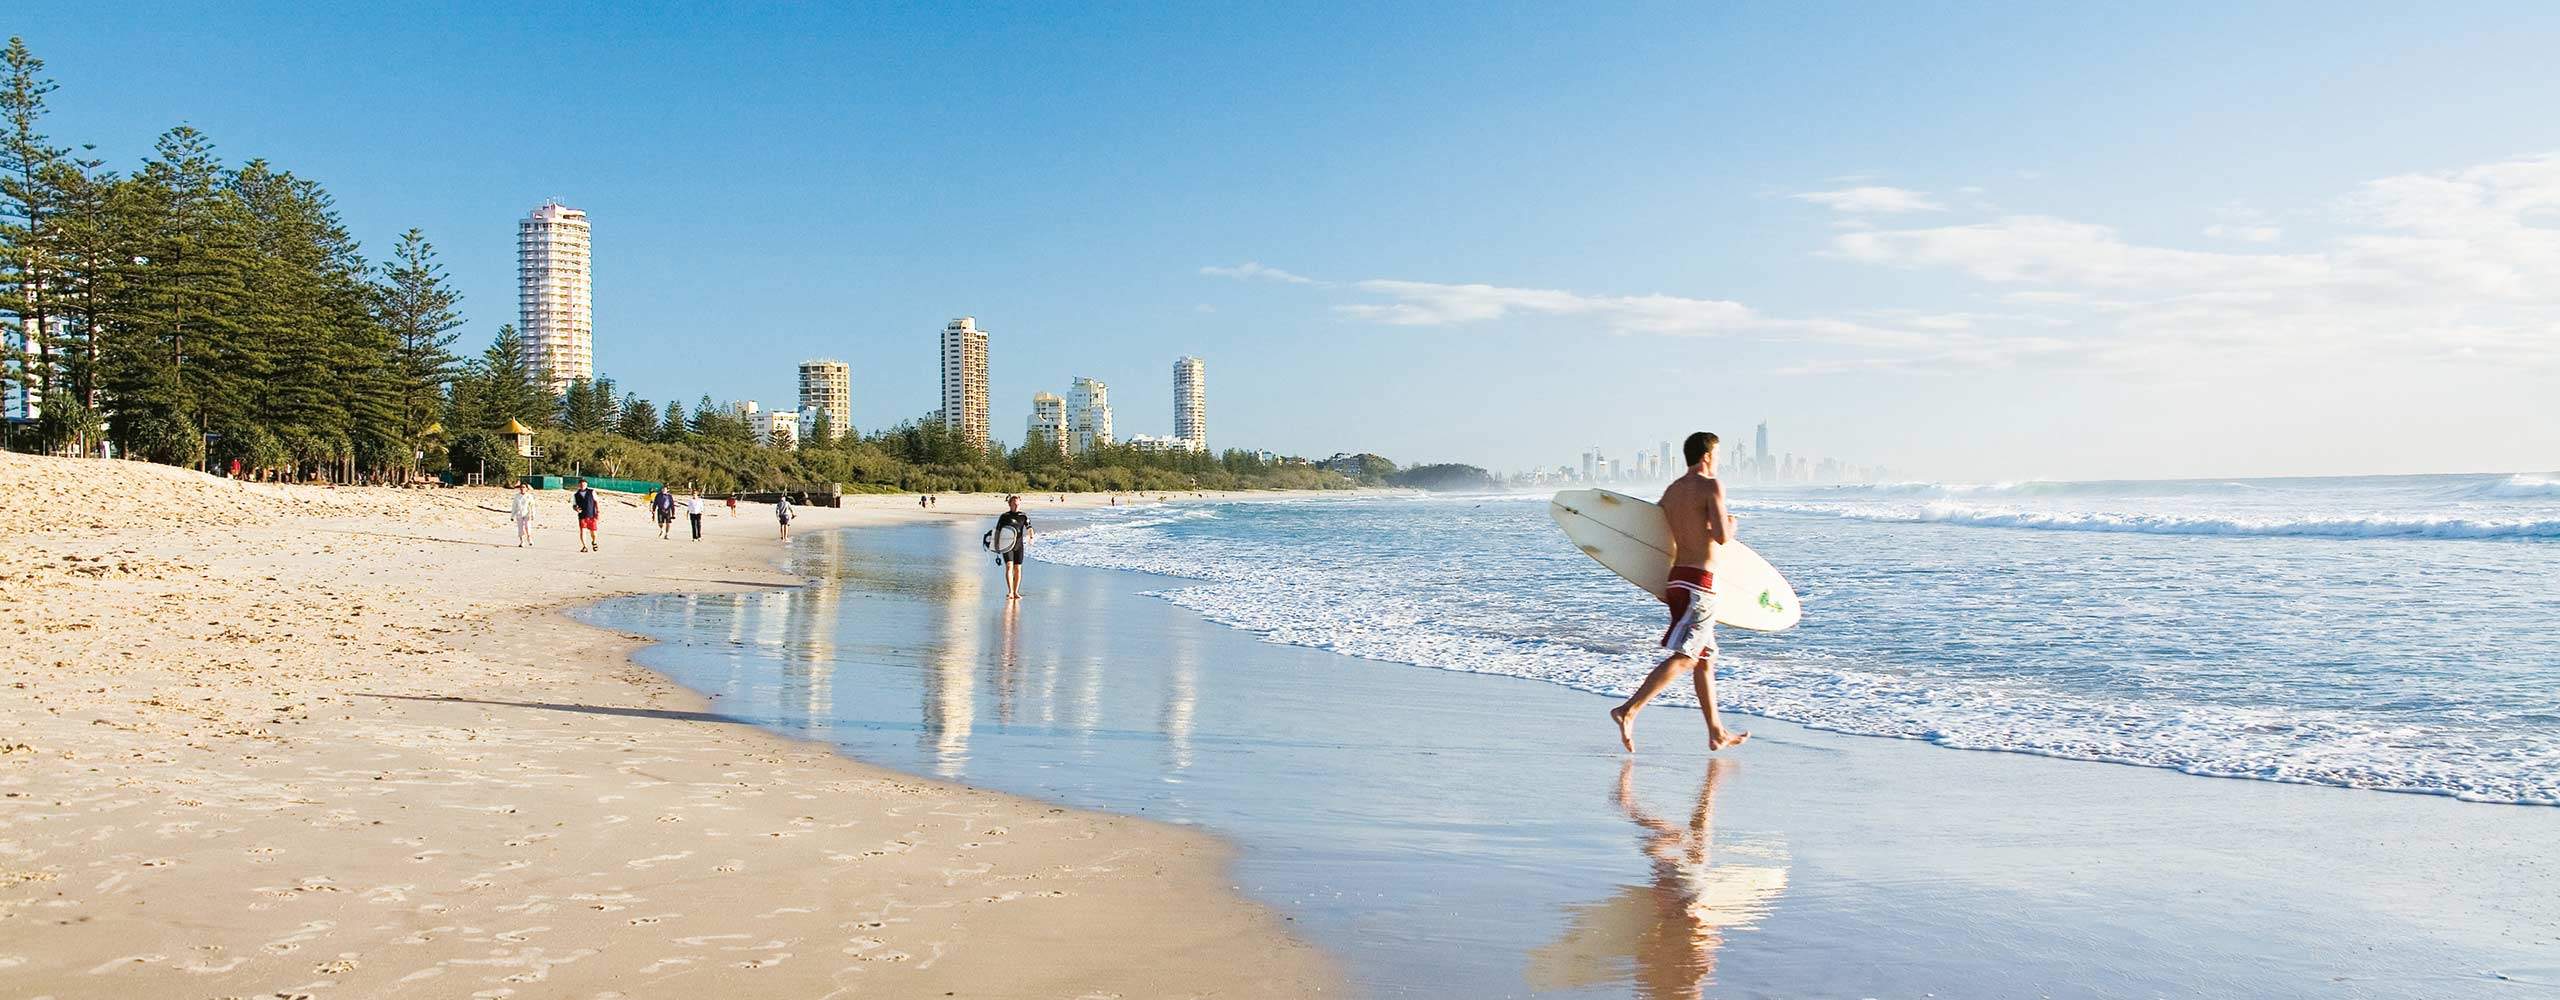 Free WiFi Is Coming to Queensland Beaches